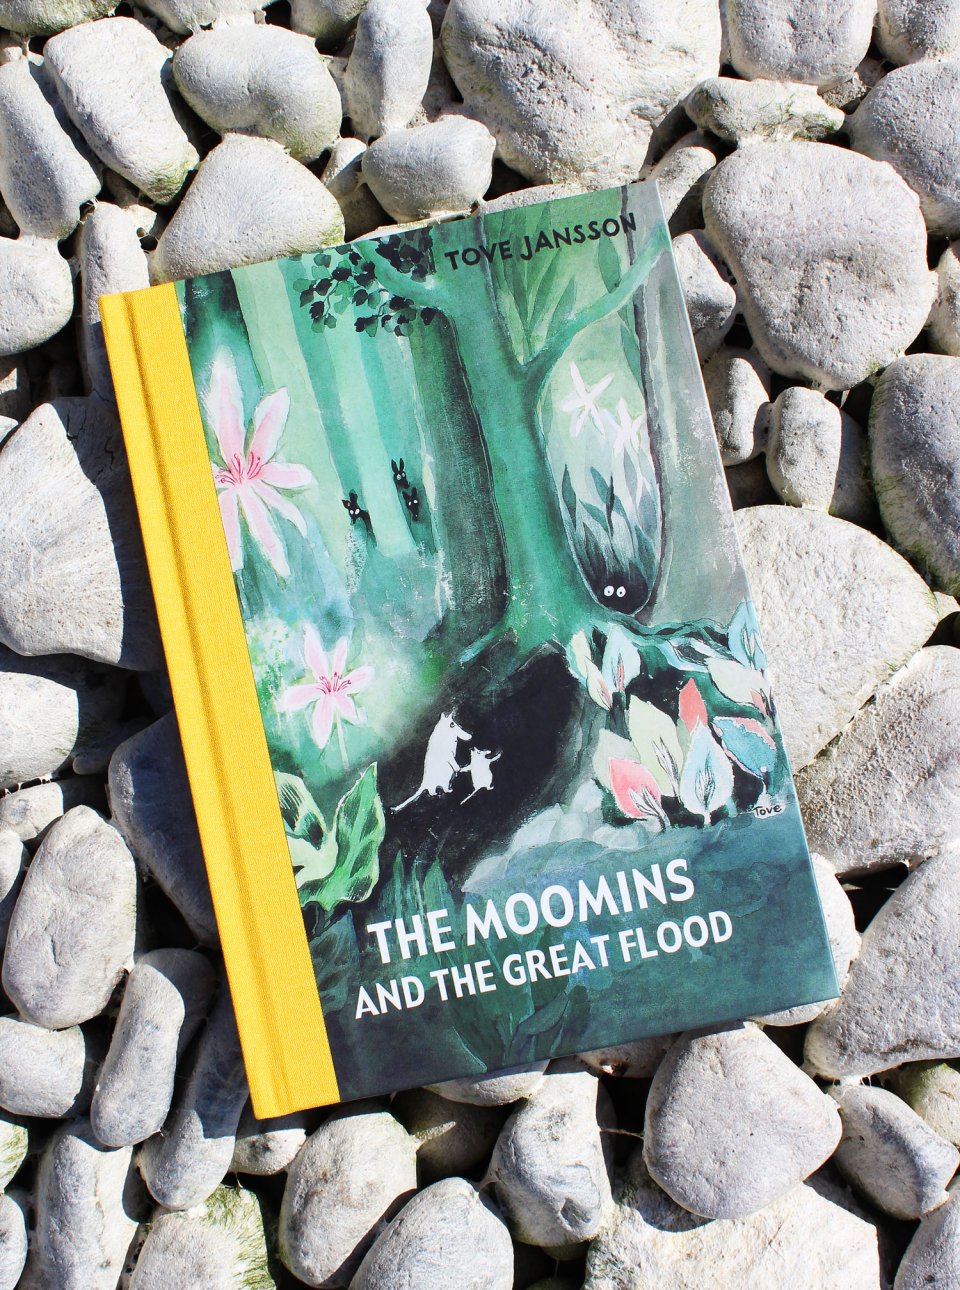 The Moomins and the great flood